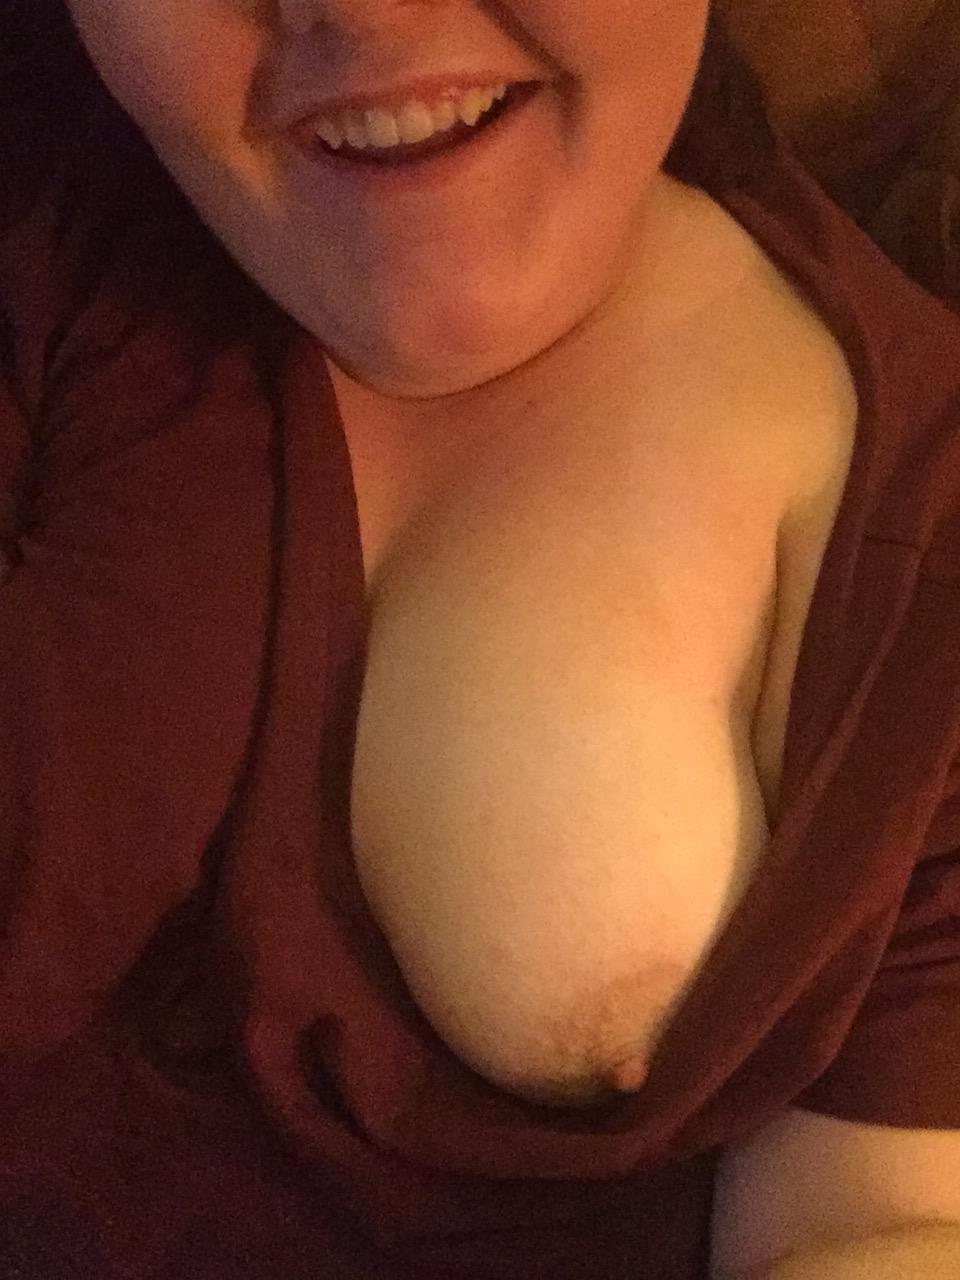 It's so chilly! Anyone want to warm me up? 21F